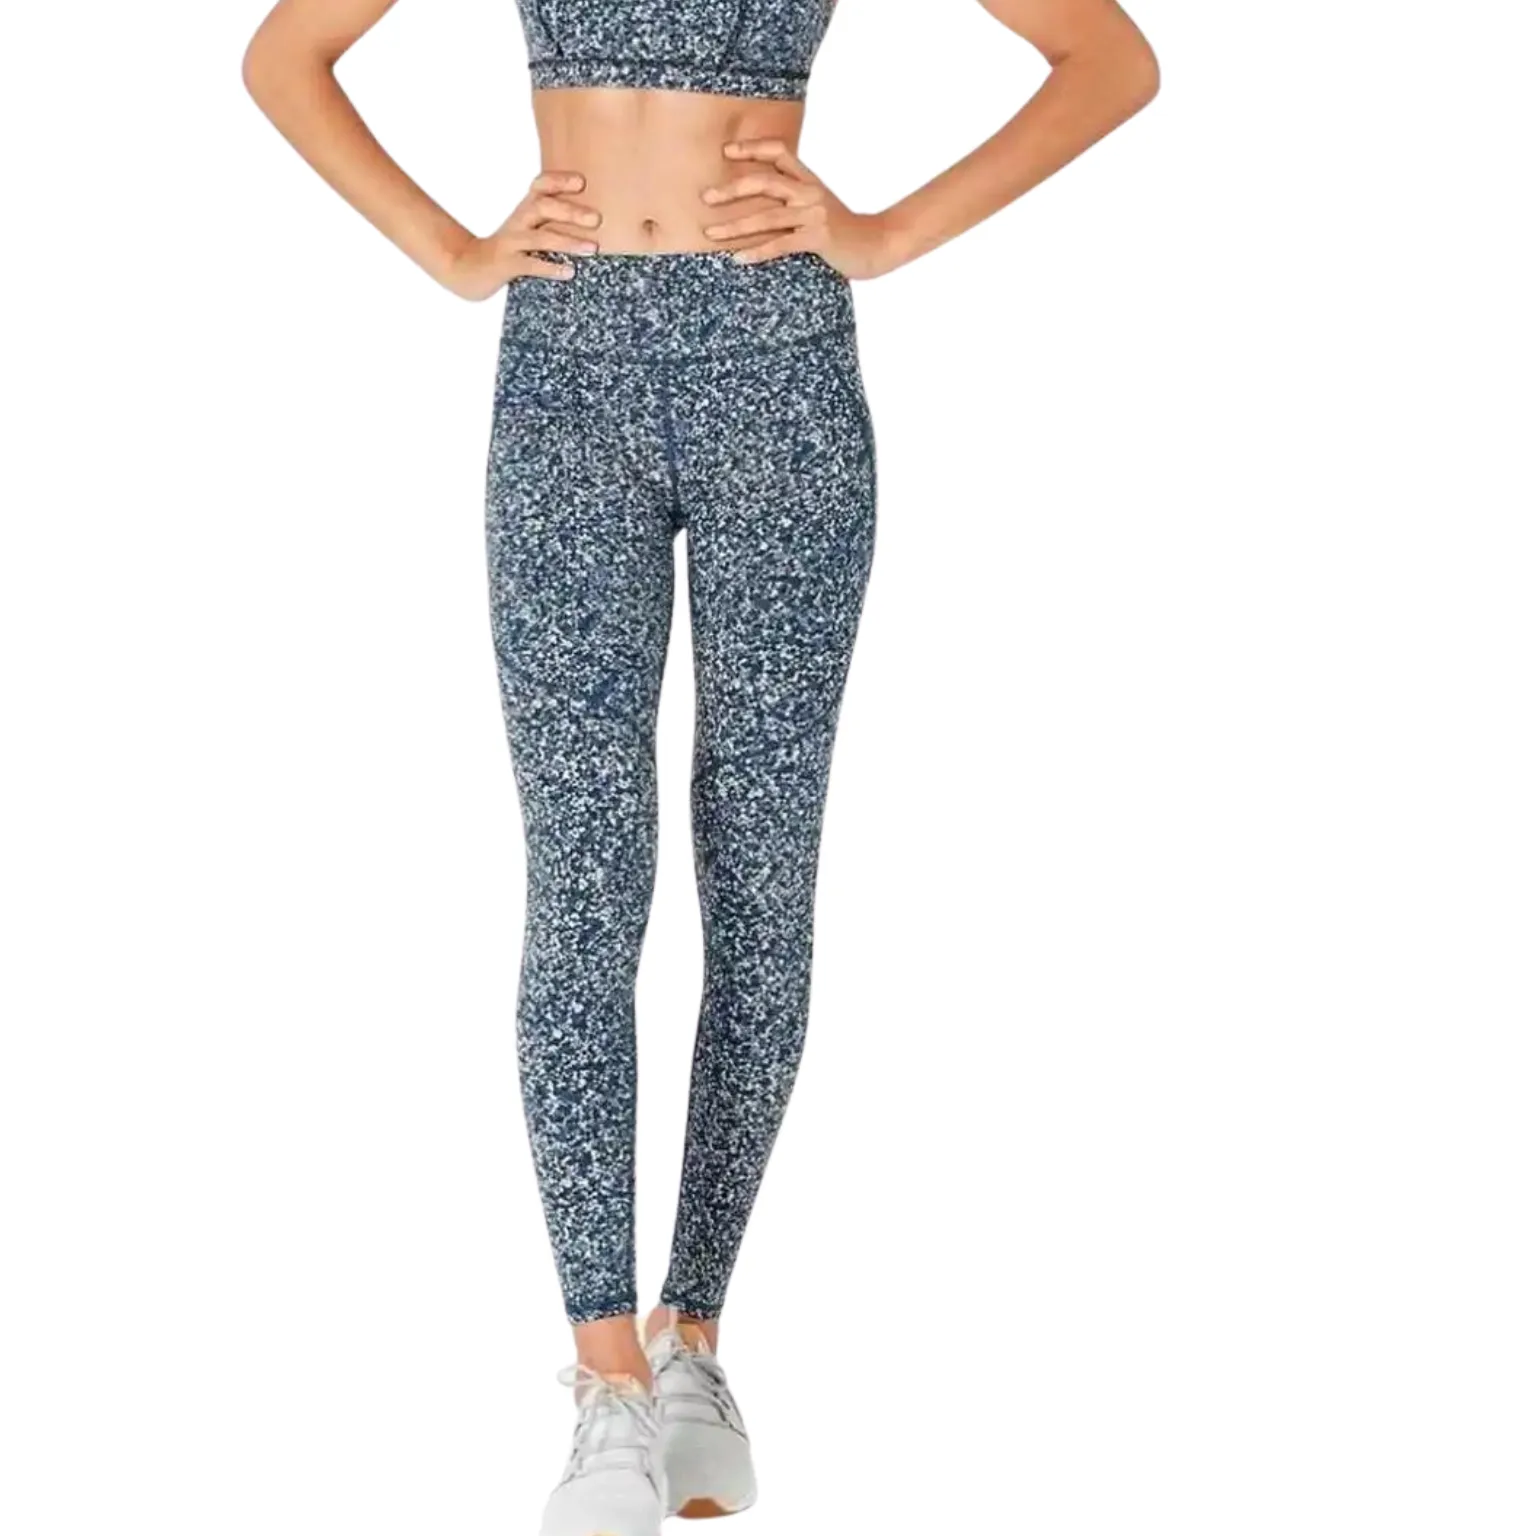 Printed Leggings manufacturing with trendy design